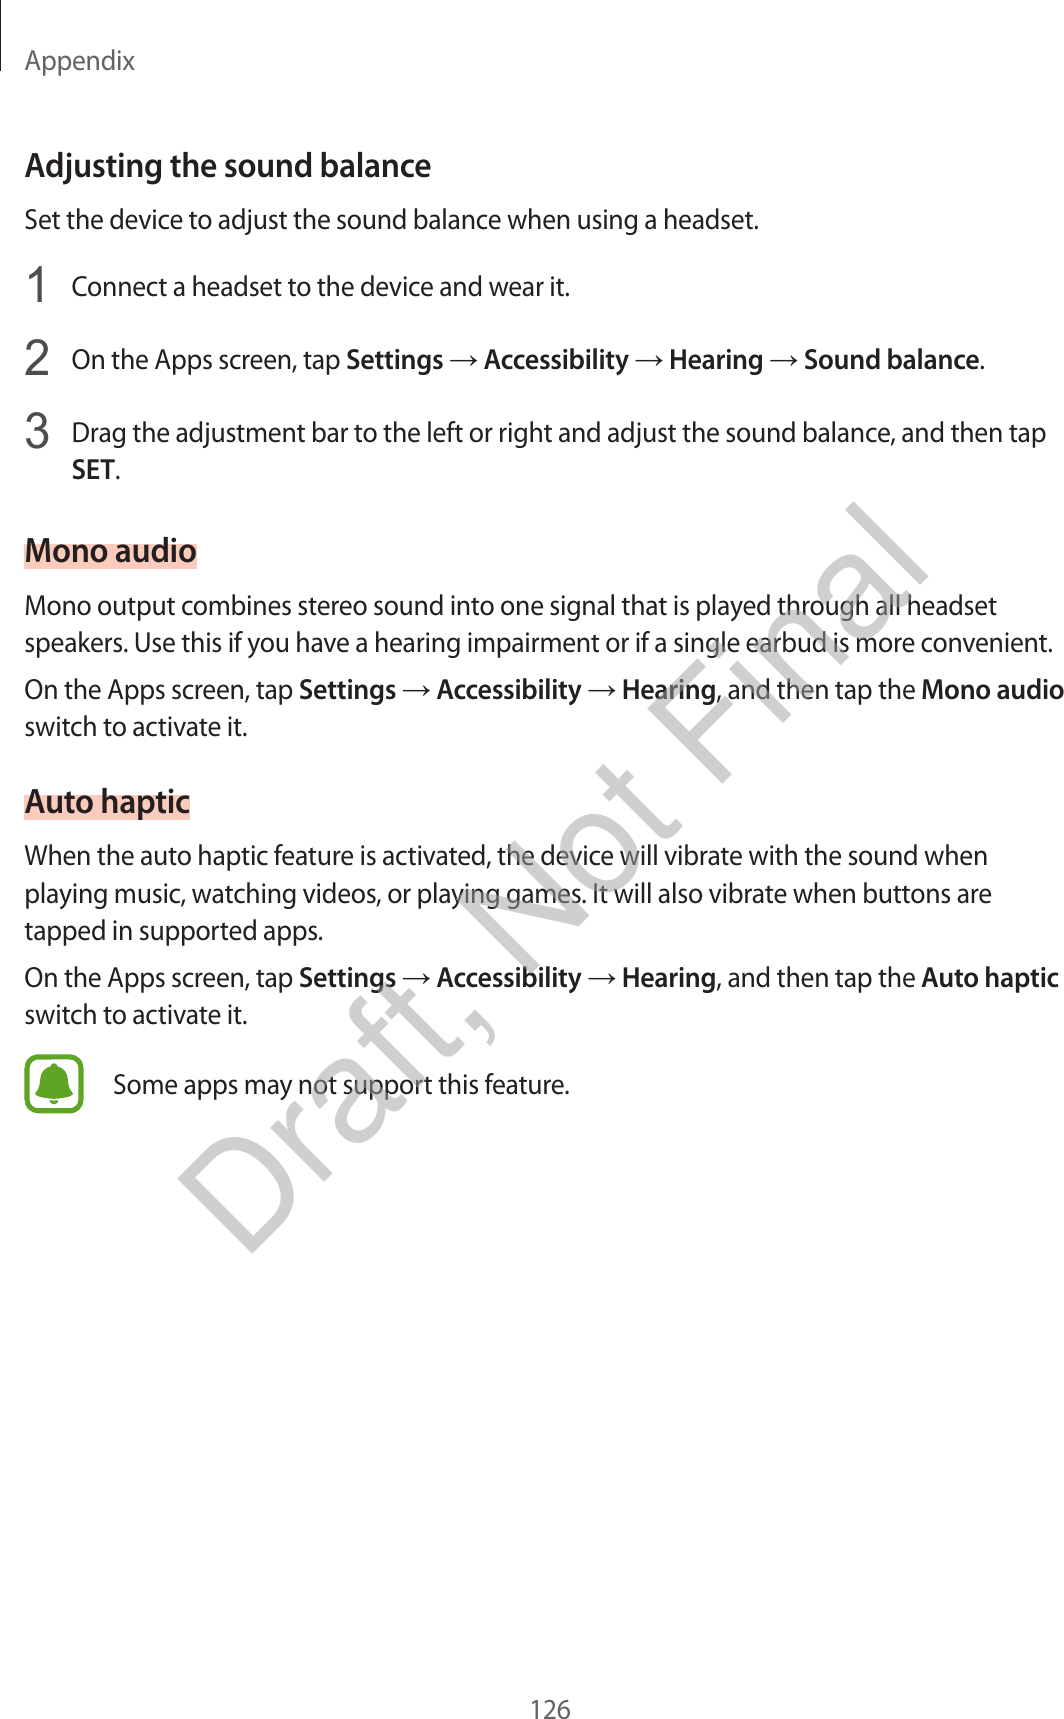 Appendix126Adjusting the sound balanceSet the device to adjust the sound balance when using a headset.1  Connect a headset to the device and wear it.2  On the Apps screen, tap Settings  Accessibility  Hearing  Sound balance.3  Drag the adjustment bar to the left or right and adjust the sound balance, and then tap SET.Mono audioMono output combines stereo sound into one signal that is played through all headset speakers. Use this if you have a hearing impairment or if a single earbud is more convenient.On the Apps screen, tap Settings  Accessibility  Hearing, and then tap the Mono audio switch to activate it.Auto hapticWhen the auto haptic feature is activated, the device will vibrate with the sound when playing music, watching videos, or playing games. It will also vibrate when buttons are tapped in supported apps.On the Apps screen, tap Settings  Accessibility  Hearing, and then tap the Auto haptic switch to activate it.Some apps may not support this feature.Draft, Not Final